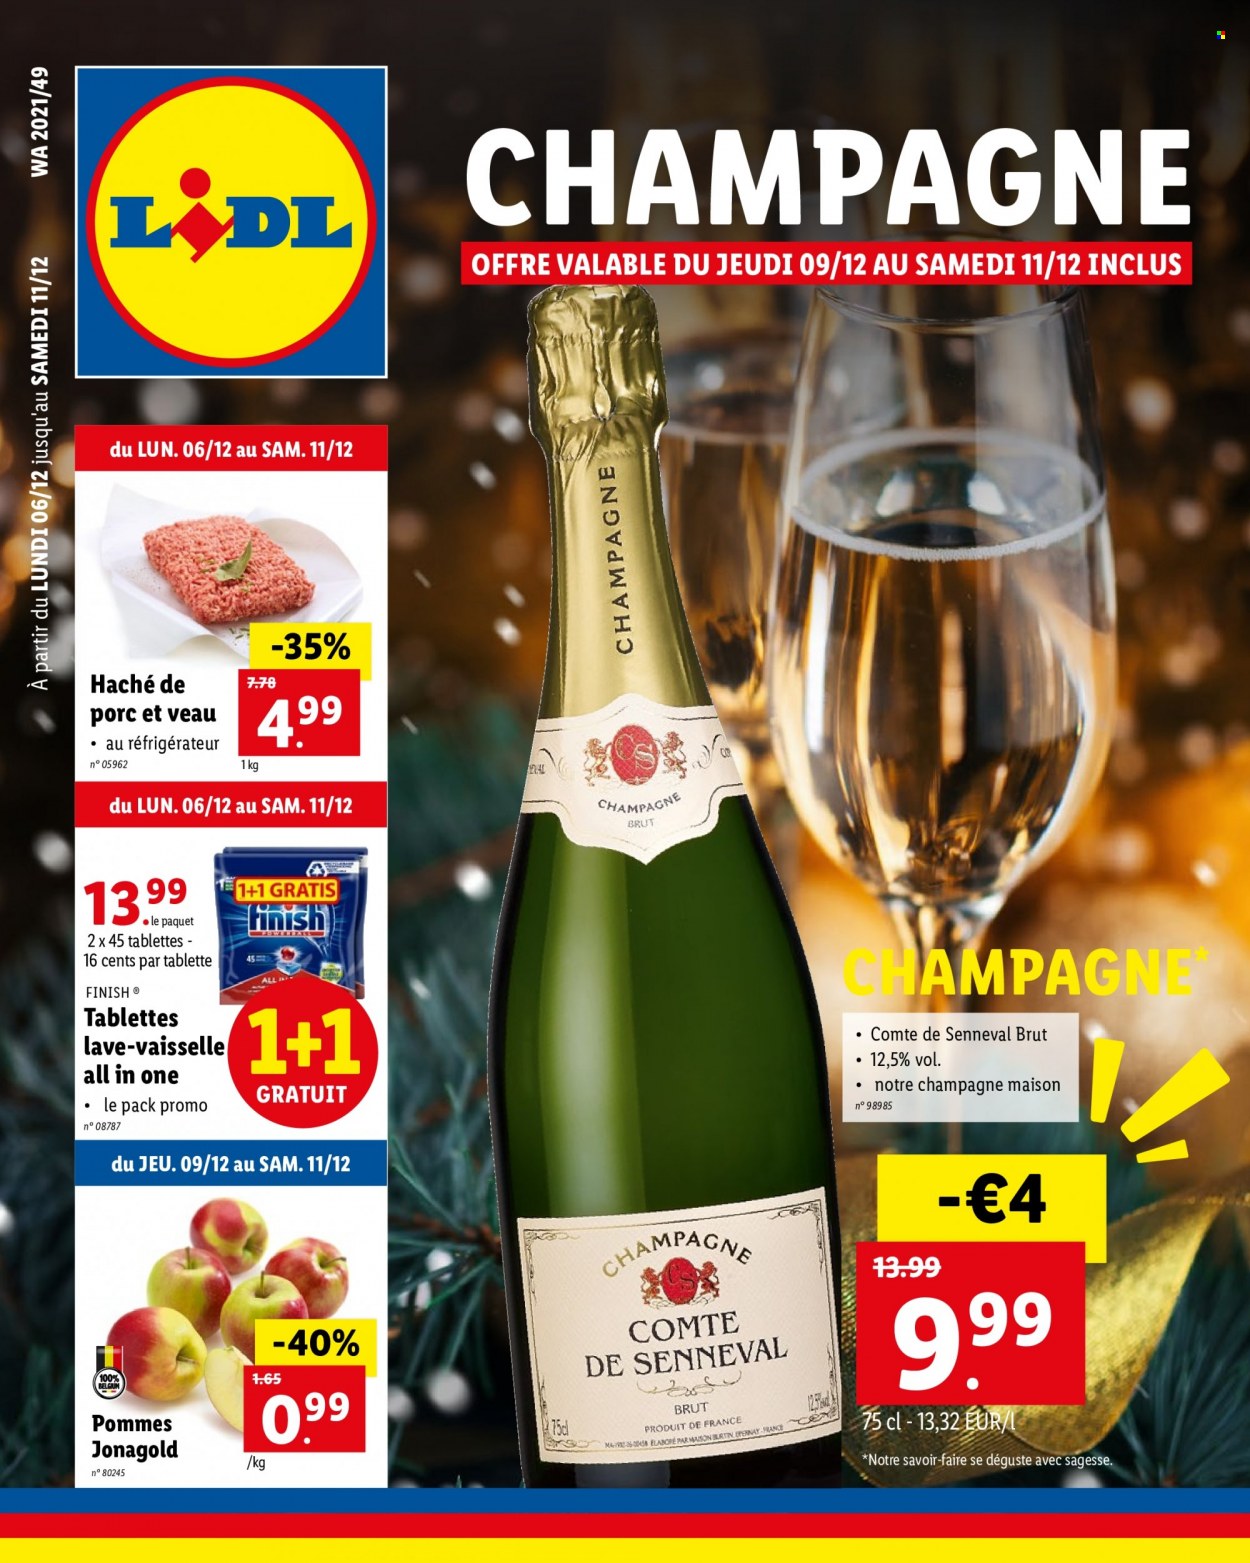 Catalogue Lidl - 6.12.2021 - 11.12.2021. Page 1.